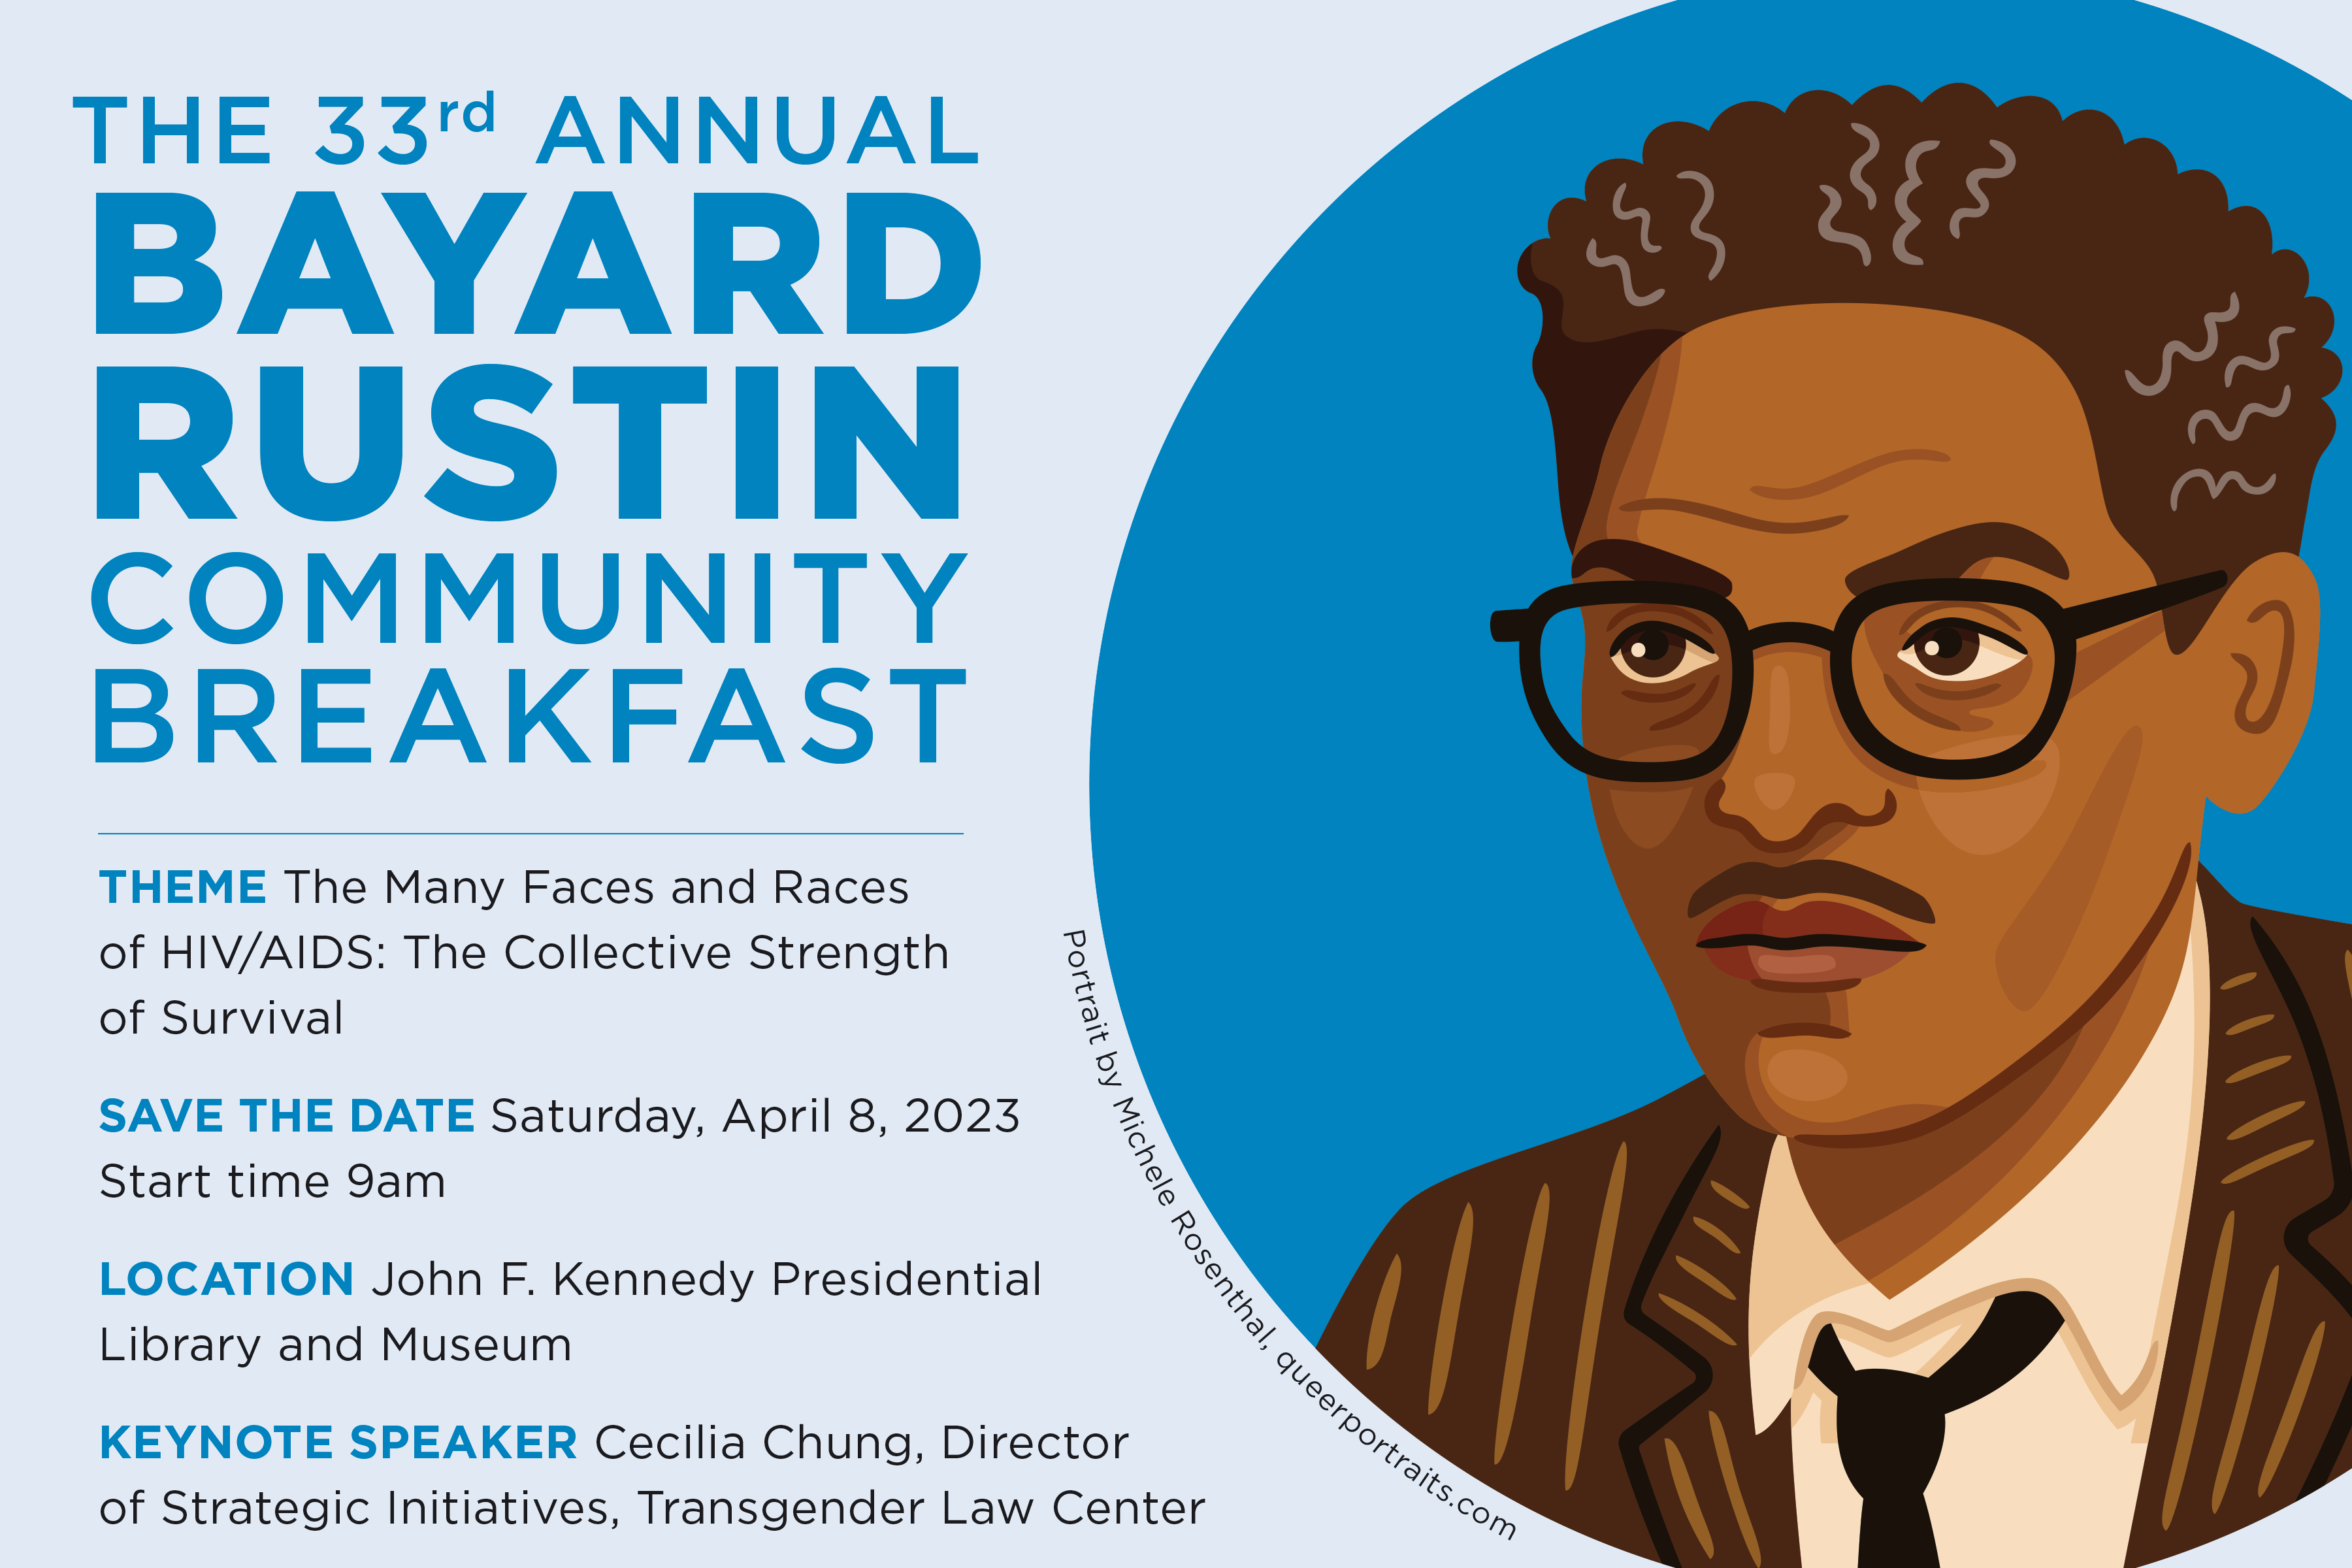 On the left, text: THE 33rd ANNUAL BAYARD RUSTIN COMMUNITY BREAKFAST. THEME - The Many Faces and Races of HIV/AIDS: The Collective Strength of Survival SAVE THE DATE -Saturday, April 8, 2023 Start time 9am LOCATION - John F. Kennedy Presidential Library and Museum KEYNOTE SPEAKER -Cecilia Chung, Director of Strategic Initiatives, Transgender Law Center. On the right: Illustrated portrait of Bayard Rustin by Michele Rosenthal of queerportraits.com